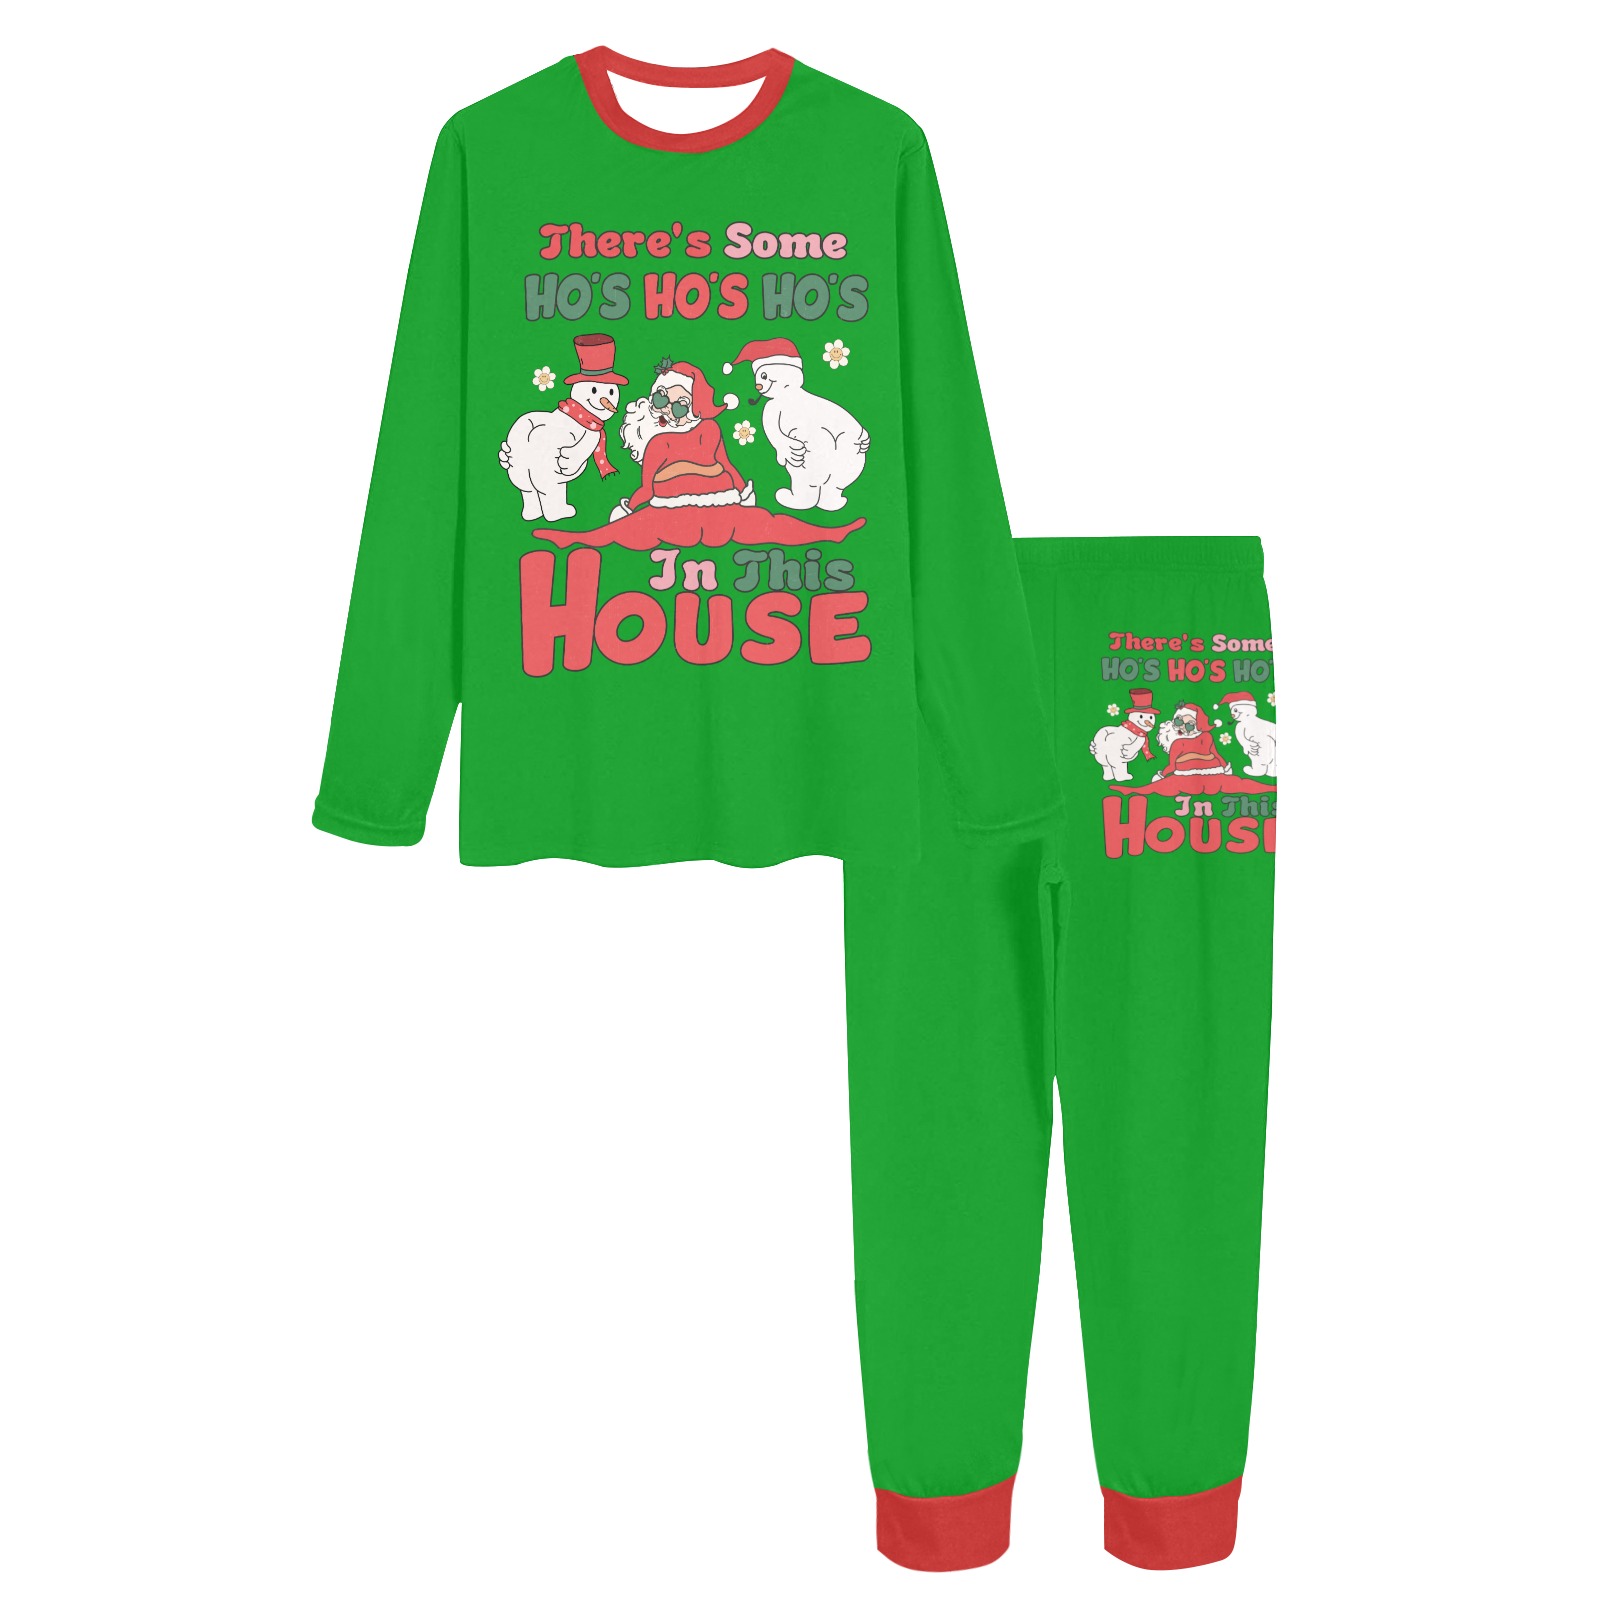 There's Some Ho's In This House (G) Women's All Over Print Pajama Set